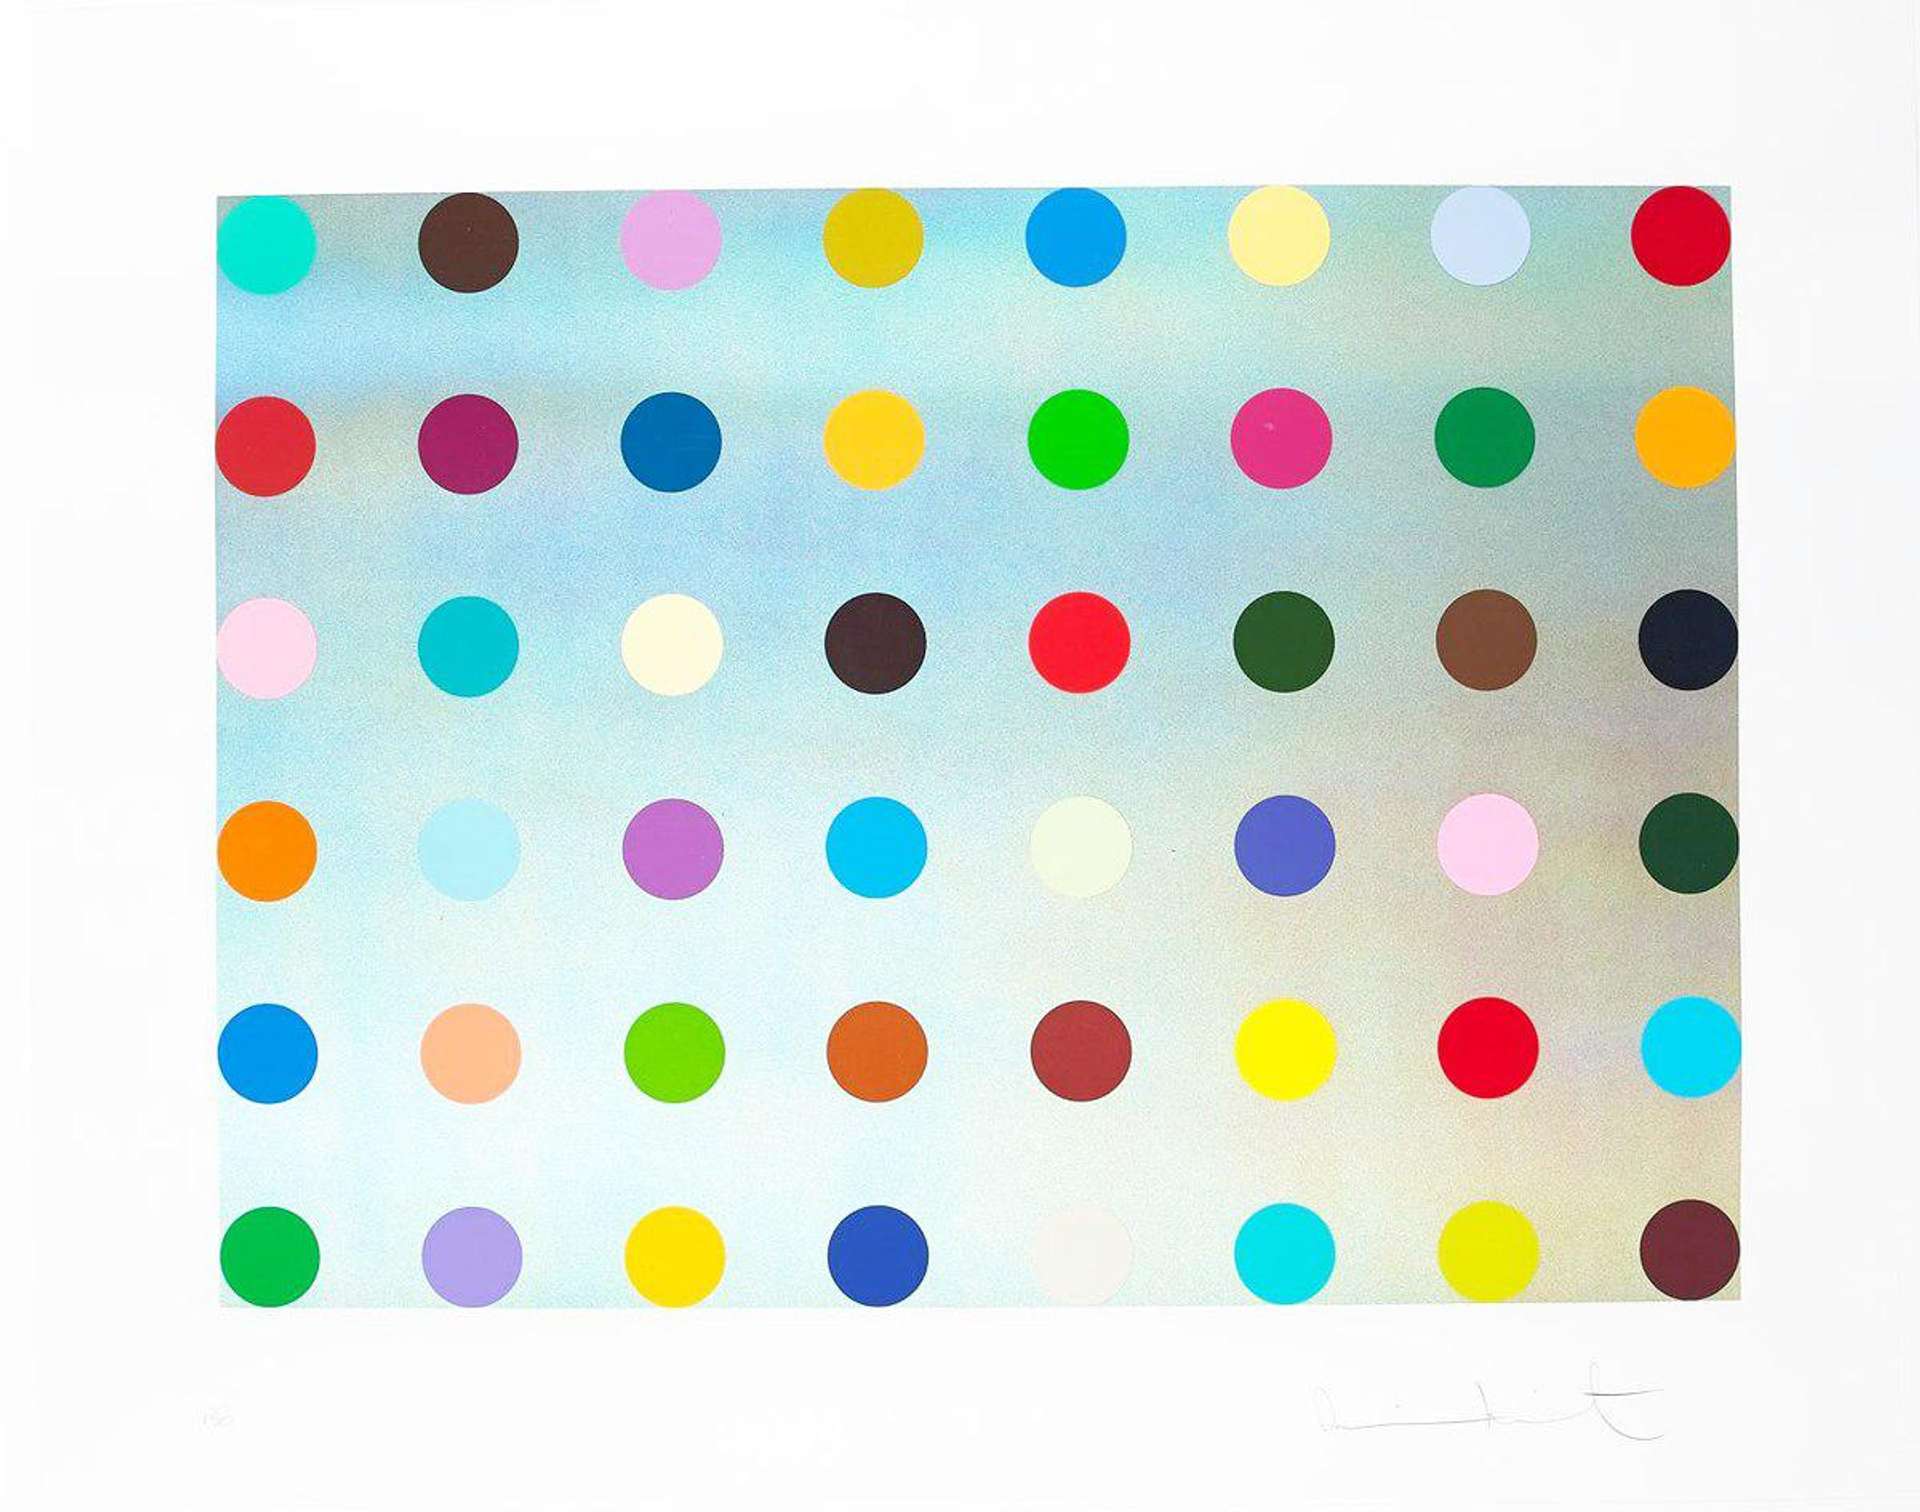 An image of the print Silver Spot Landscape by Damien Hirst, showing dozens of colourful dots against a gradient blue background.